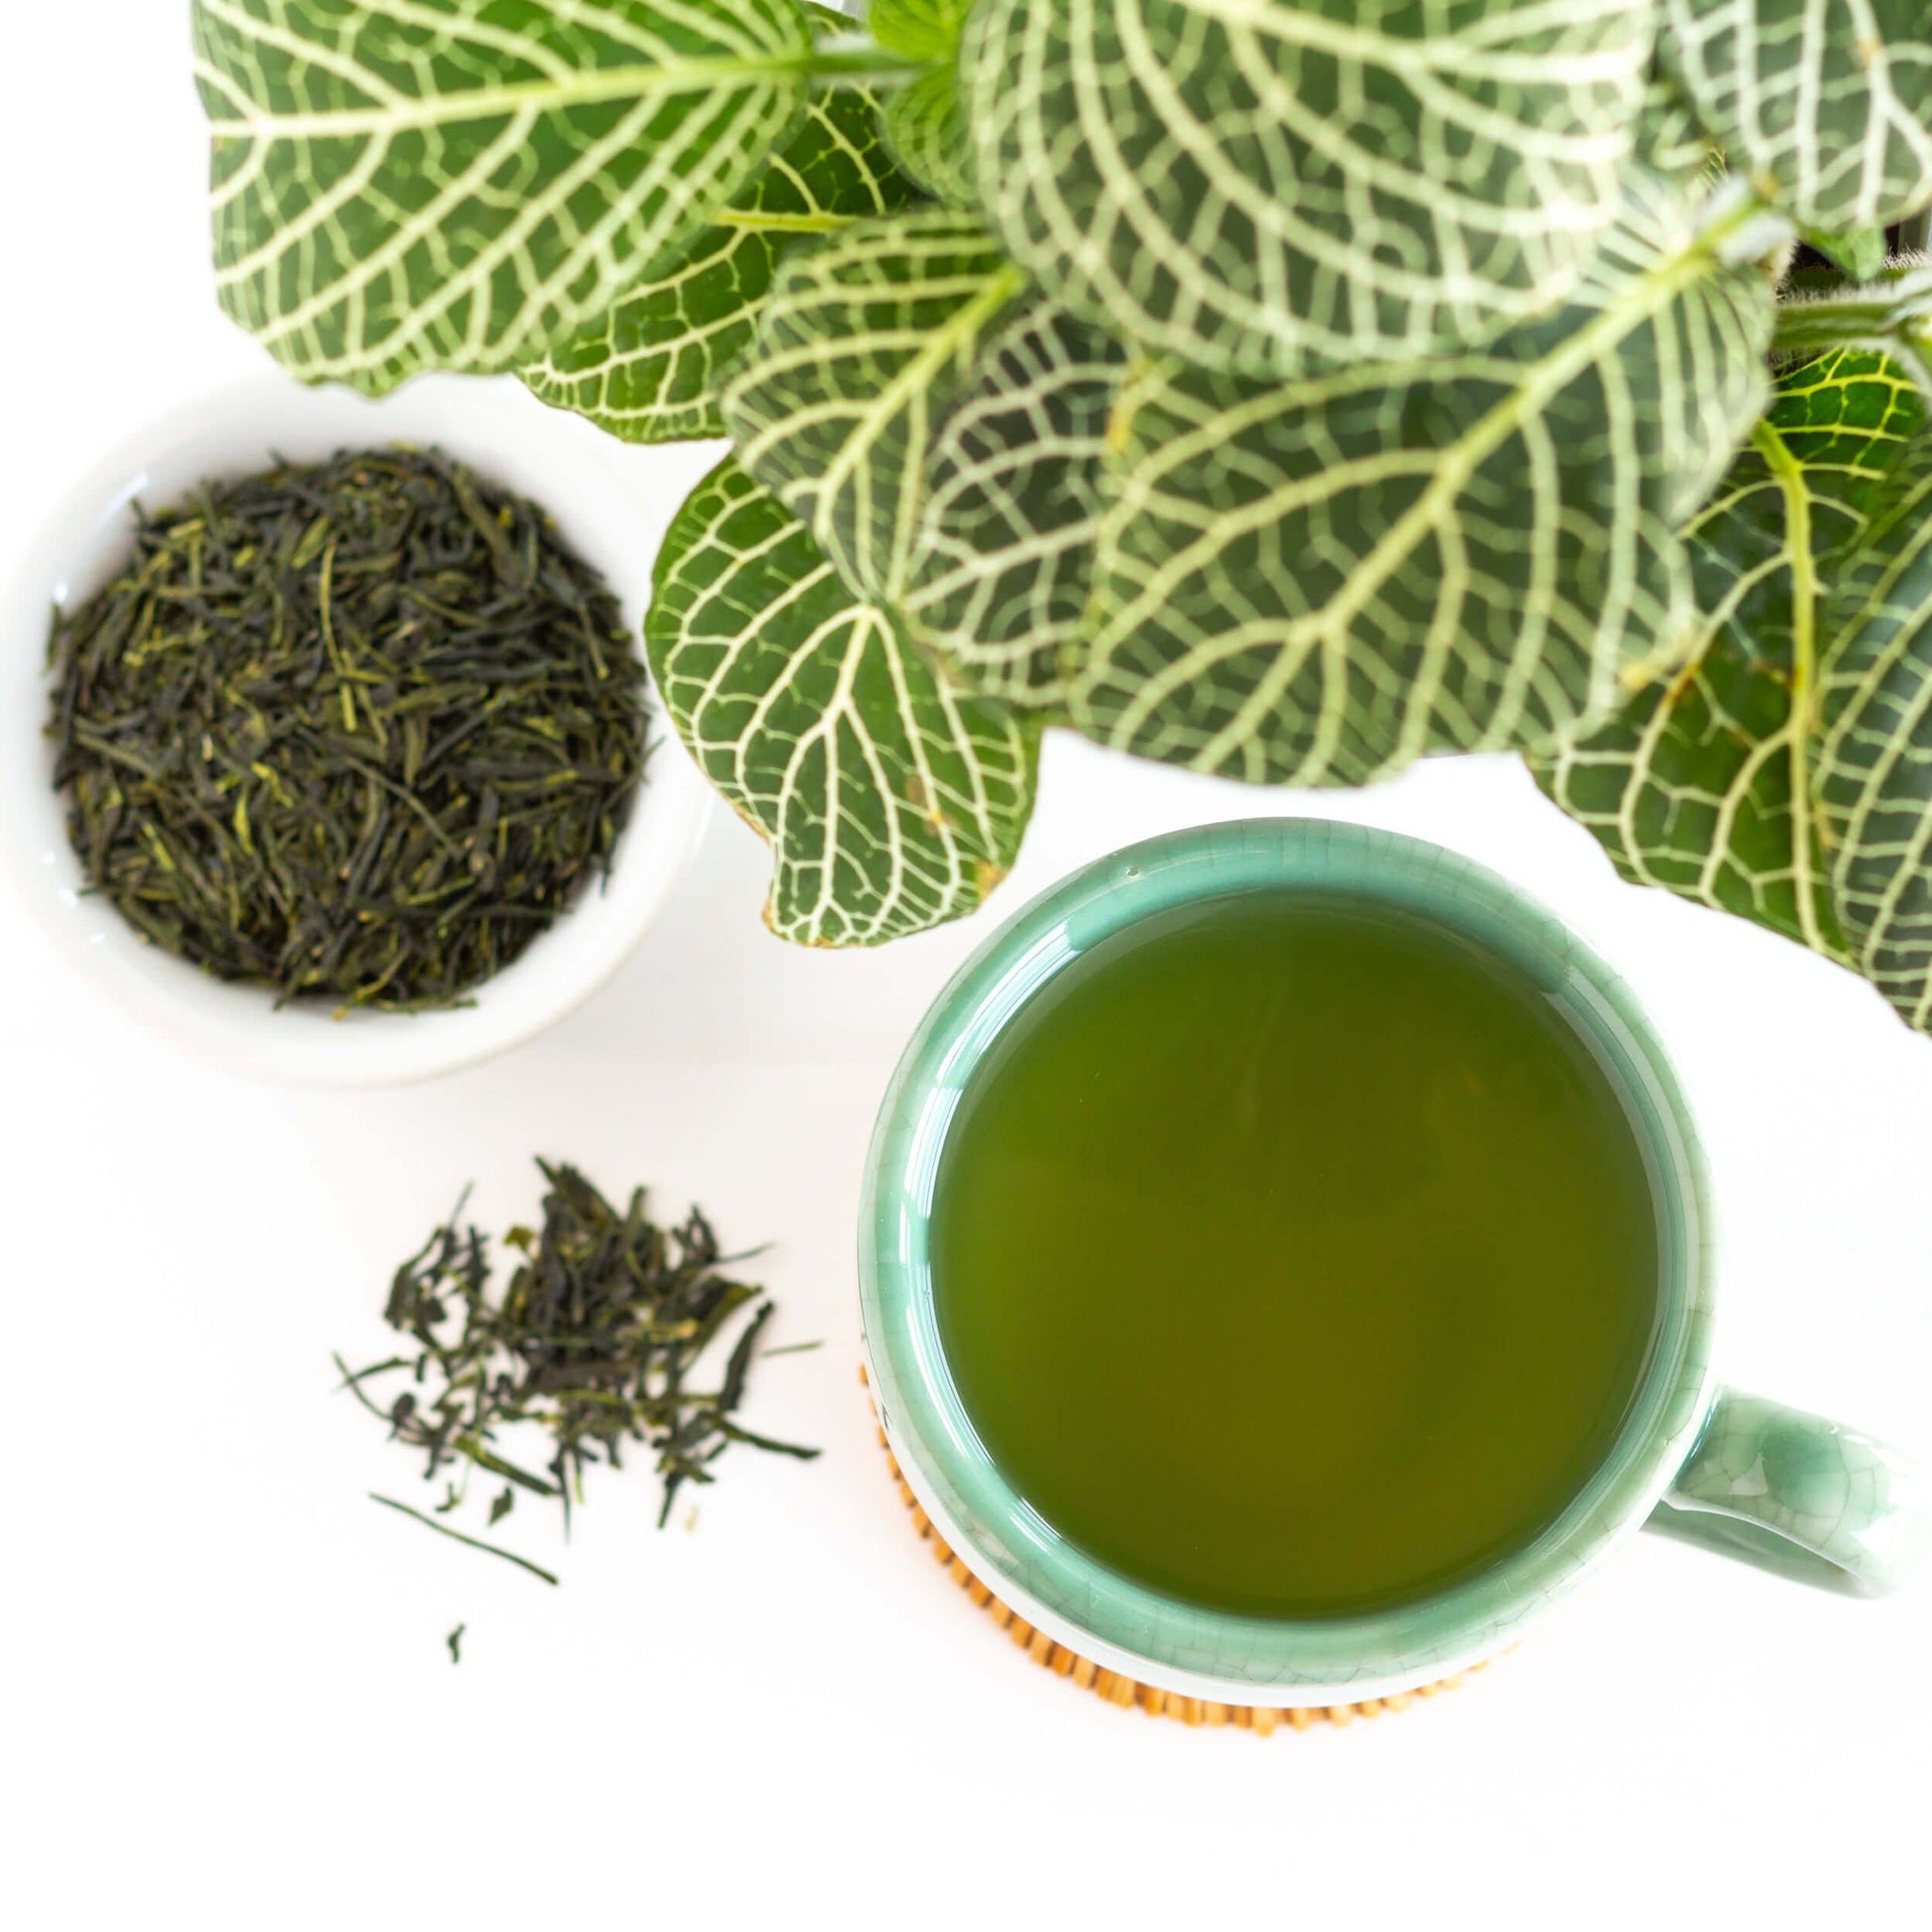 Sencha Organic Green Tea shown from above as brewed tea in a teal green mug, with small white dish of loose leaf tea and green plant